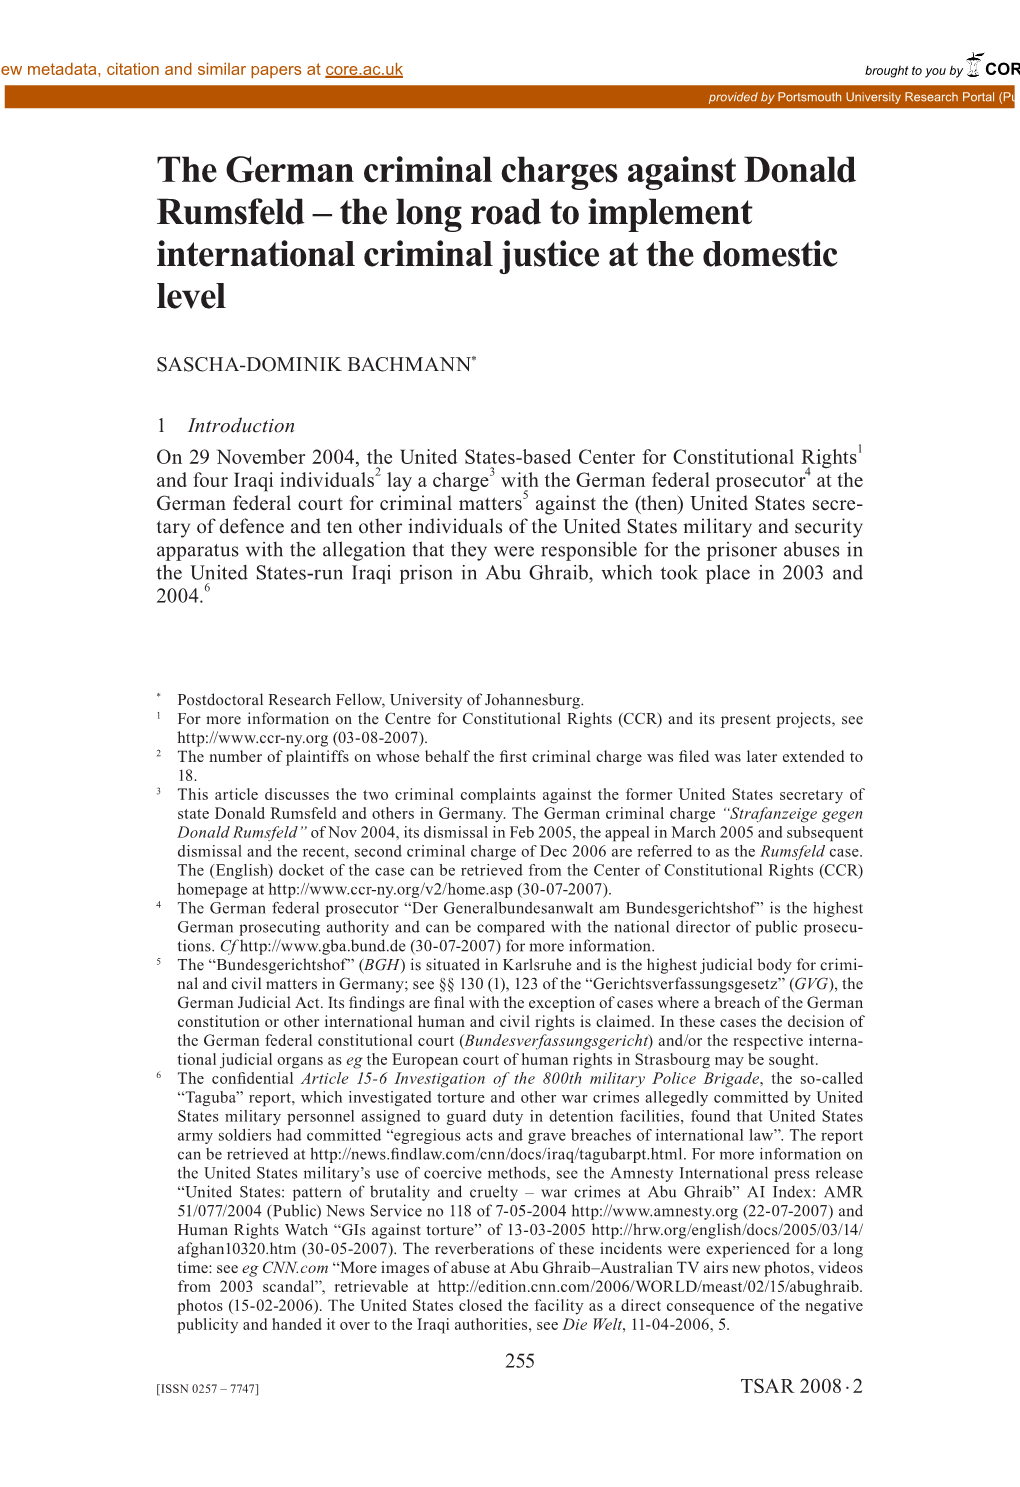 The German Criminal Charges Against Donald Rumsfeld – the Long Road to Implement International Criminal Justice at the Domestic Level